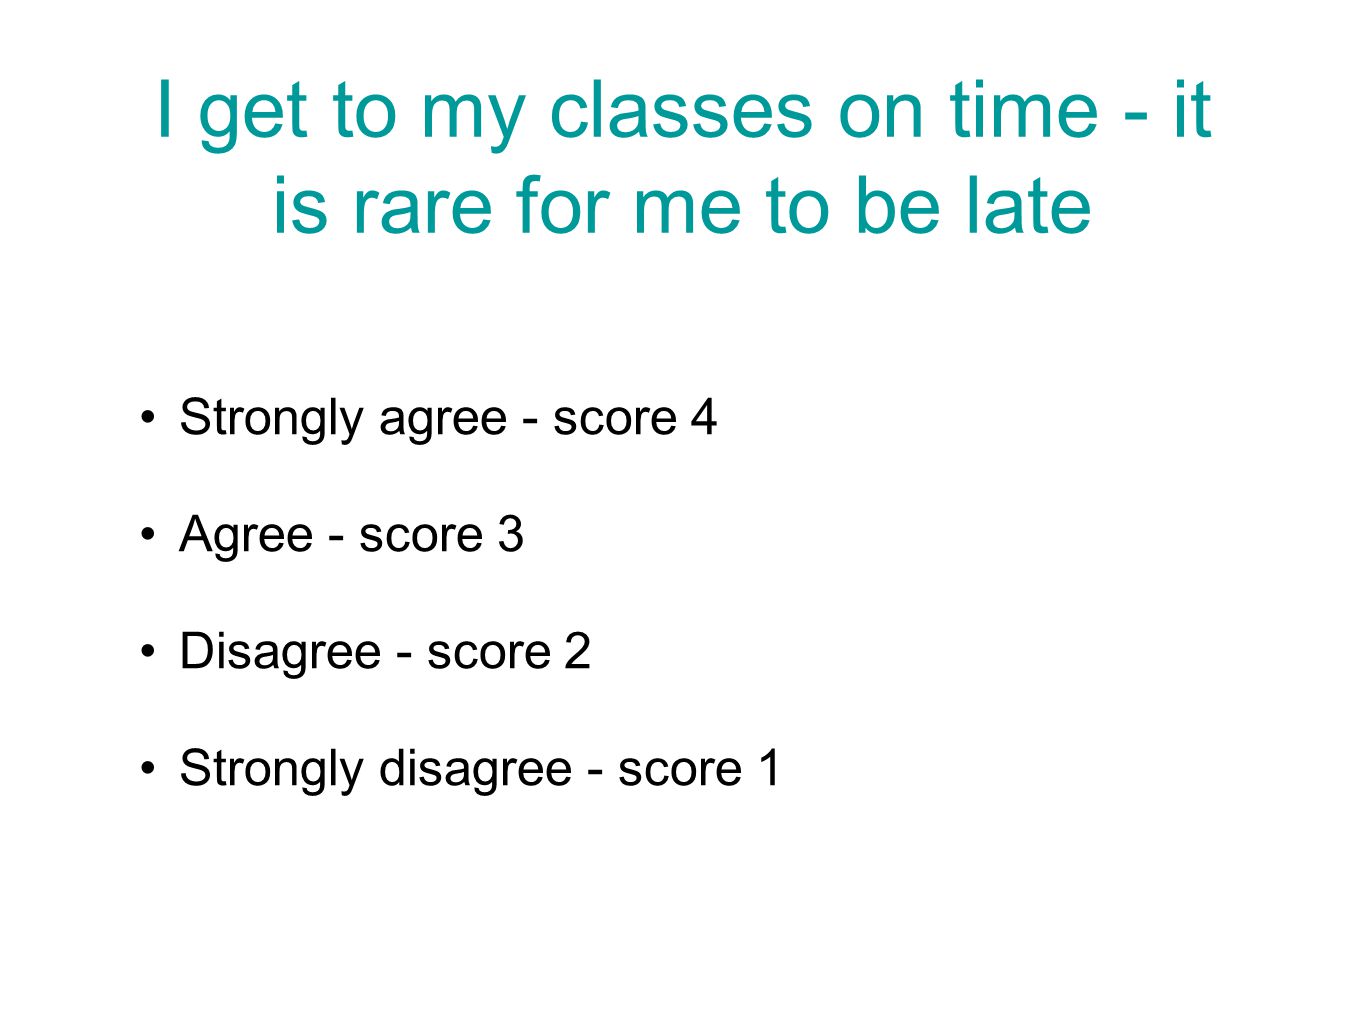 I get to my classes on time - it is rare for me to be late Strongly agree - score 4 Agree - score 3 Disagree - score 2 Strongly disagree - score 1